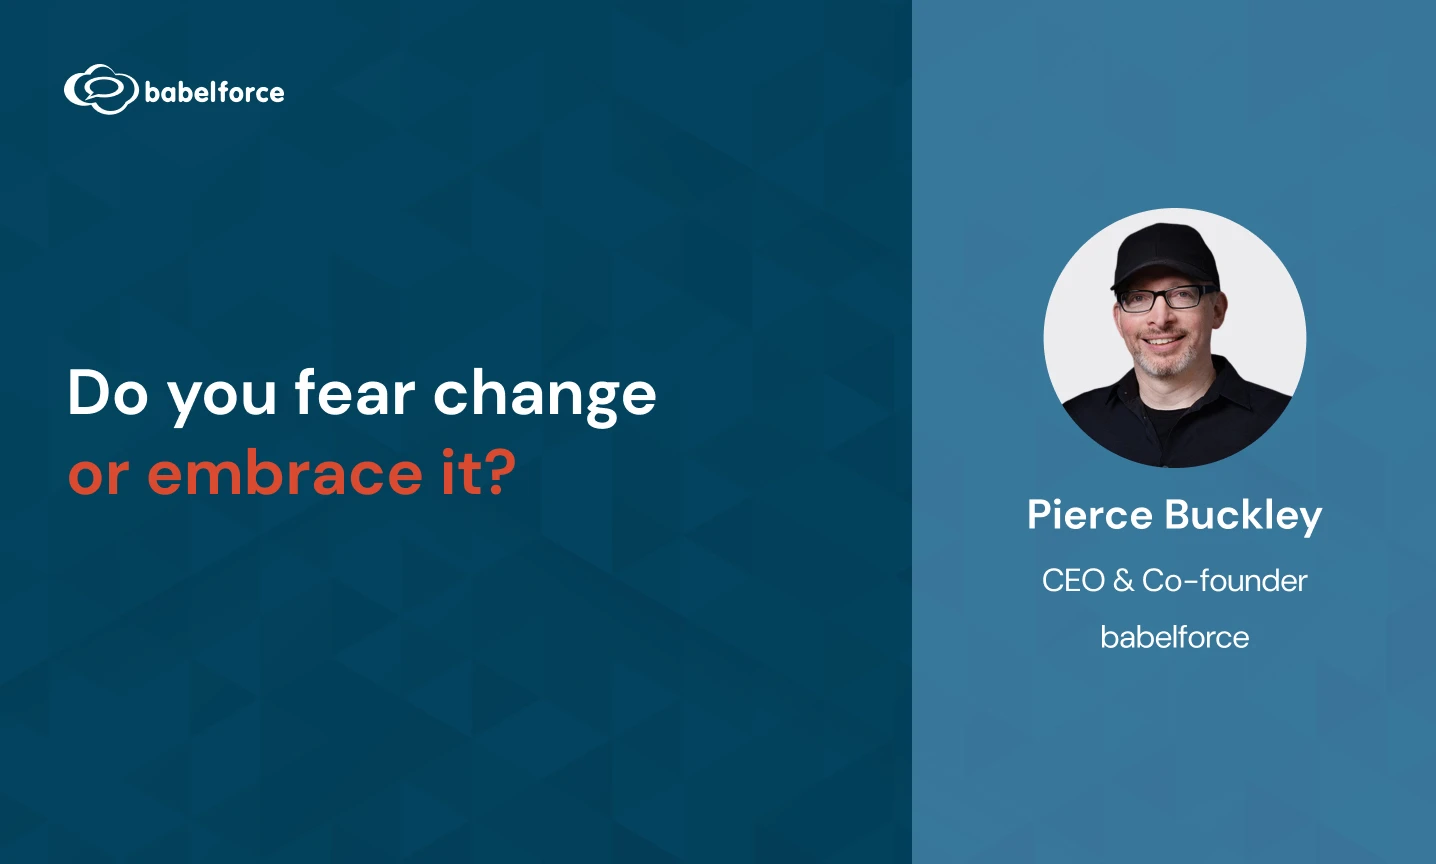 Do you fear change or embrace it?